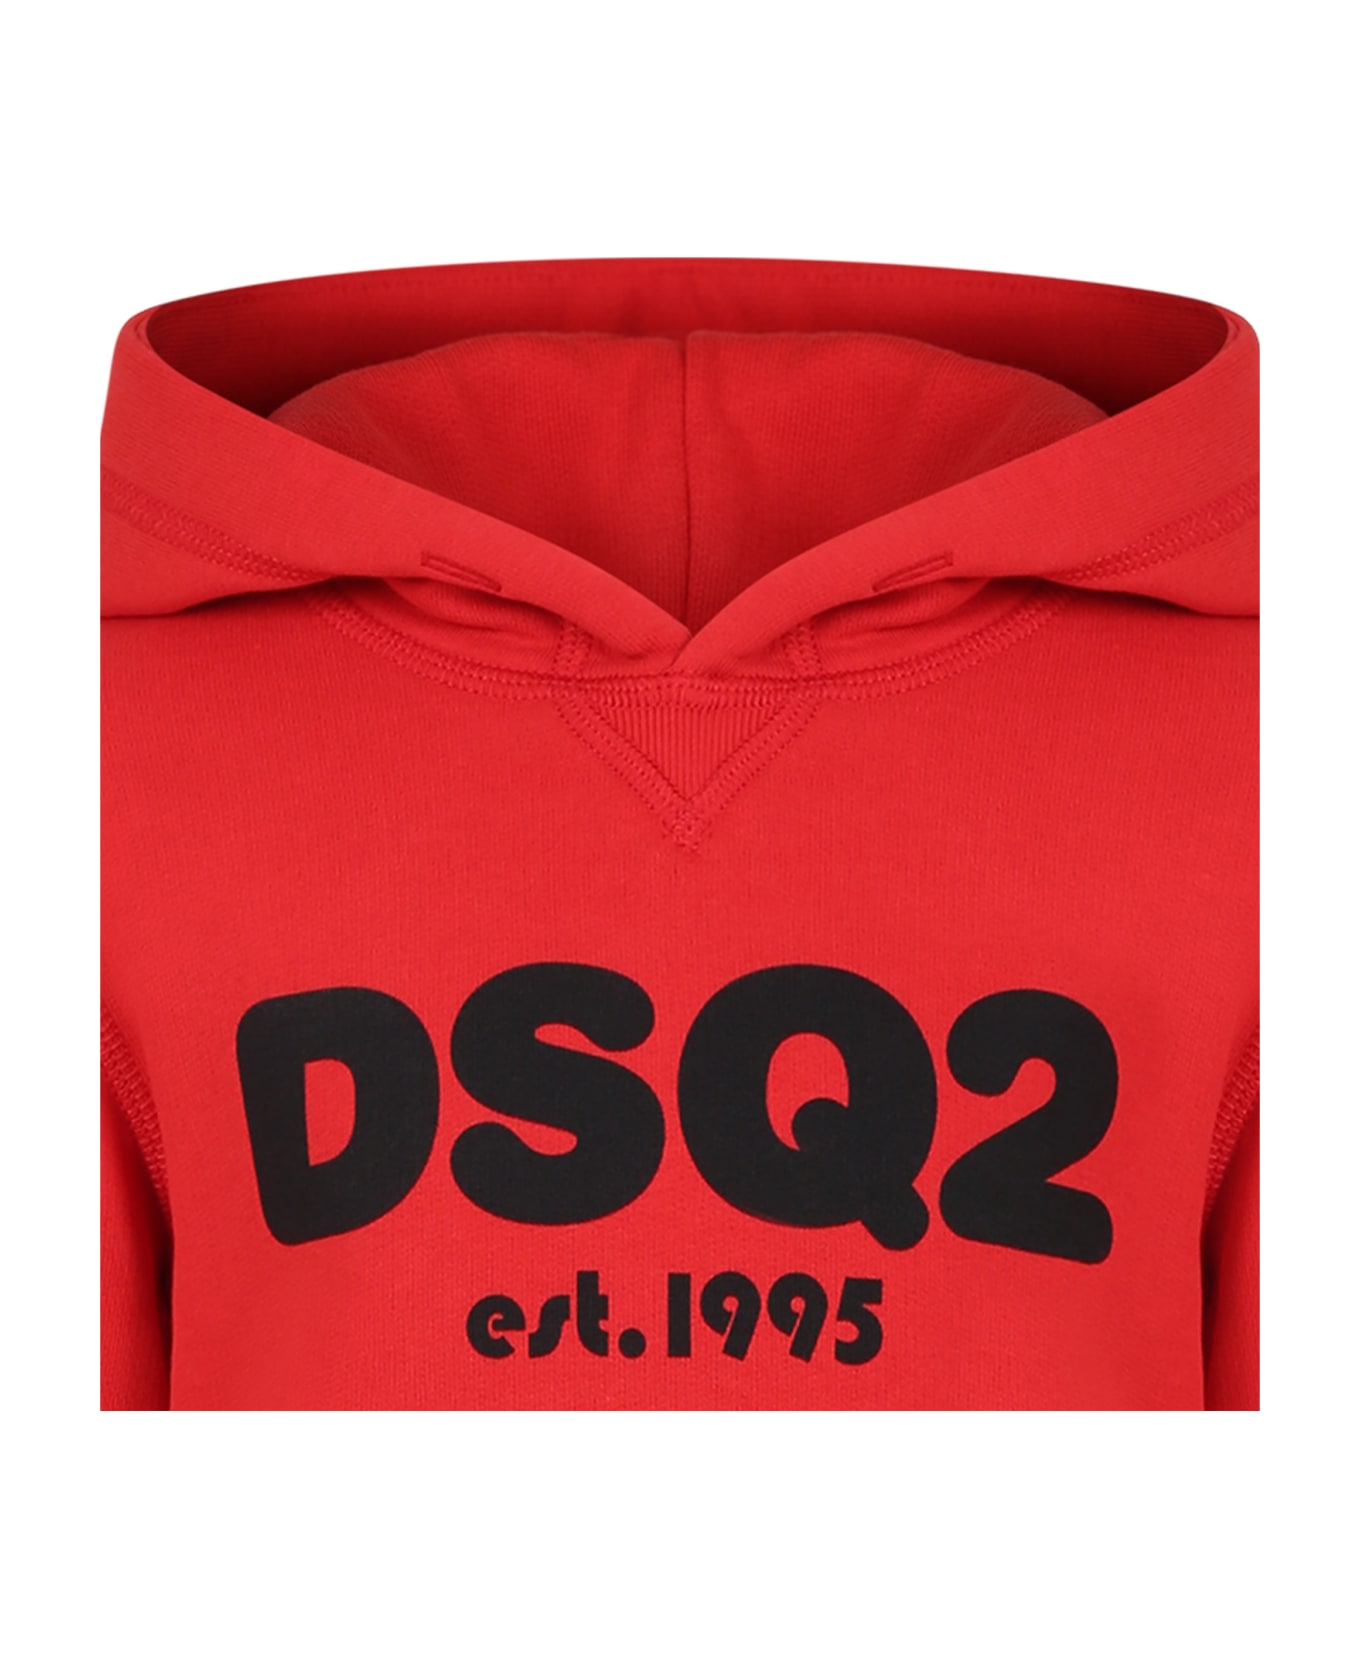 Dsquared2 Black Sweatshirt For Boy With Logo - Red